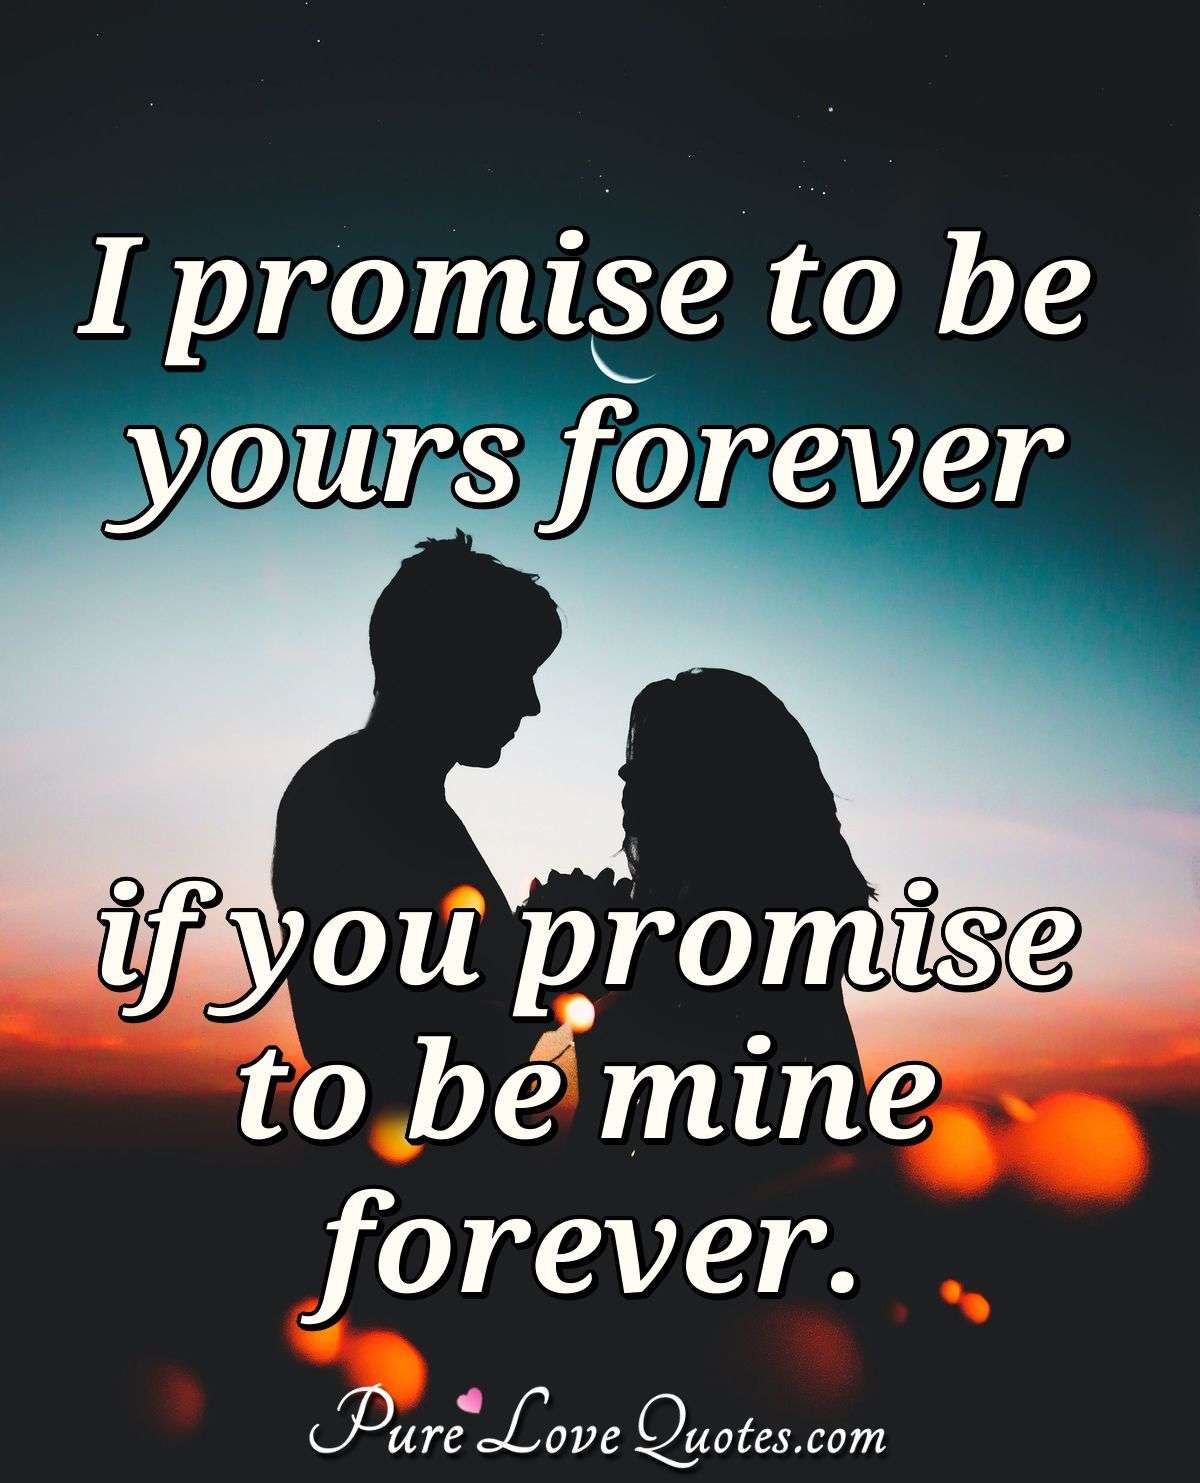 I promise to be yours forever if you promise to be mine forever ...